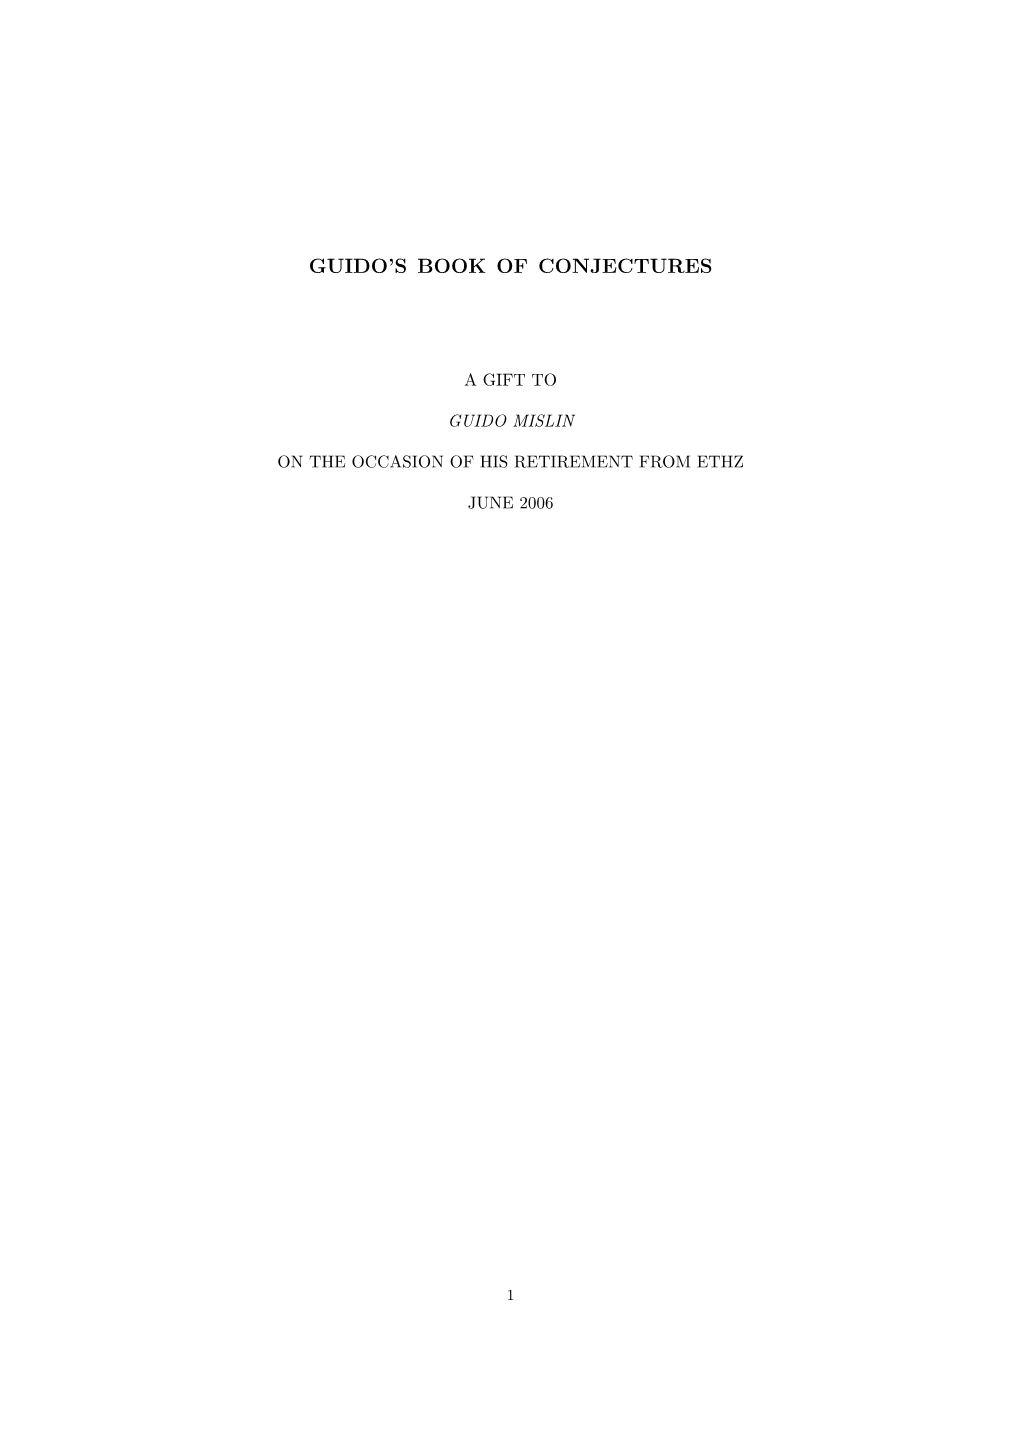 Guido's Book of Conjectures